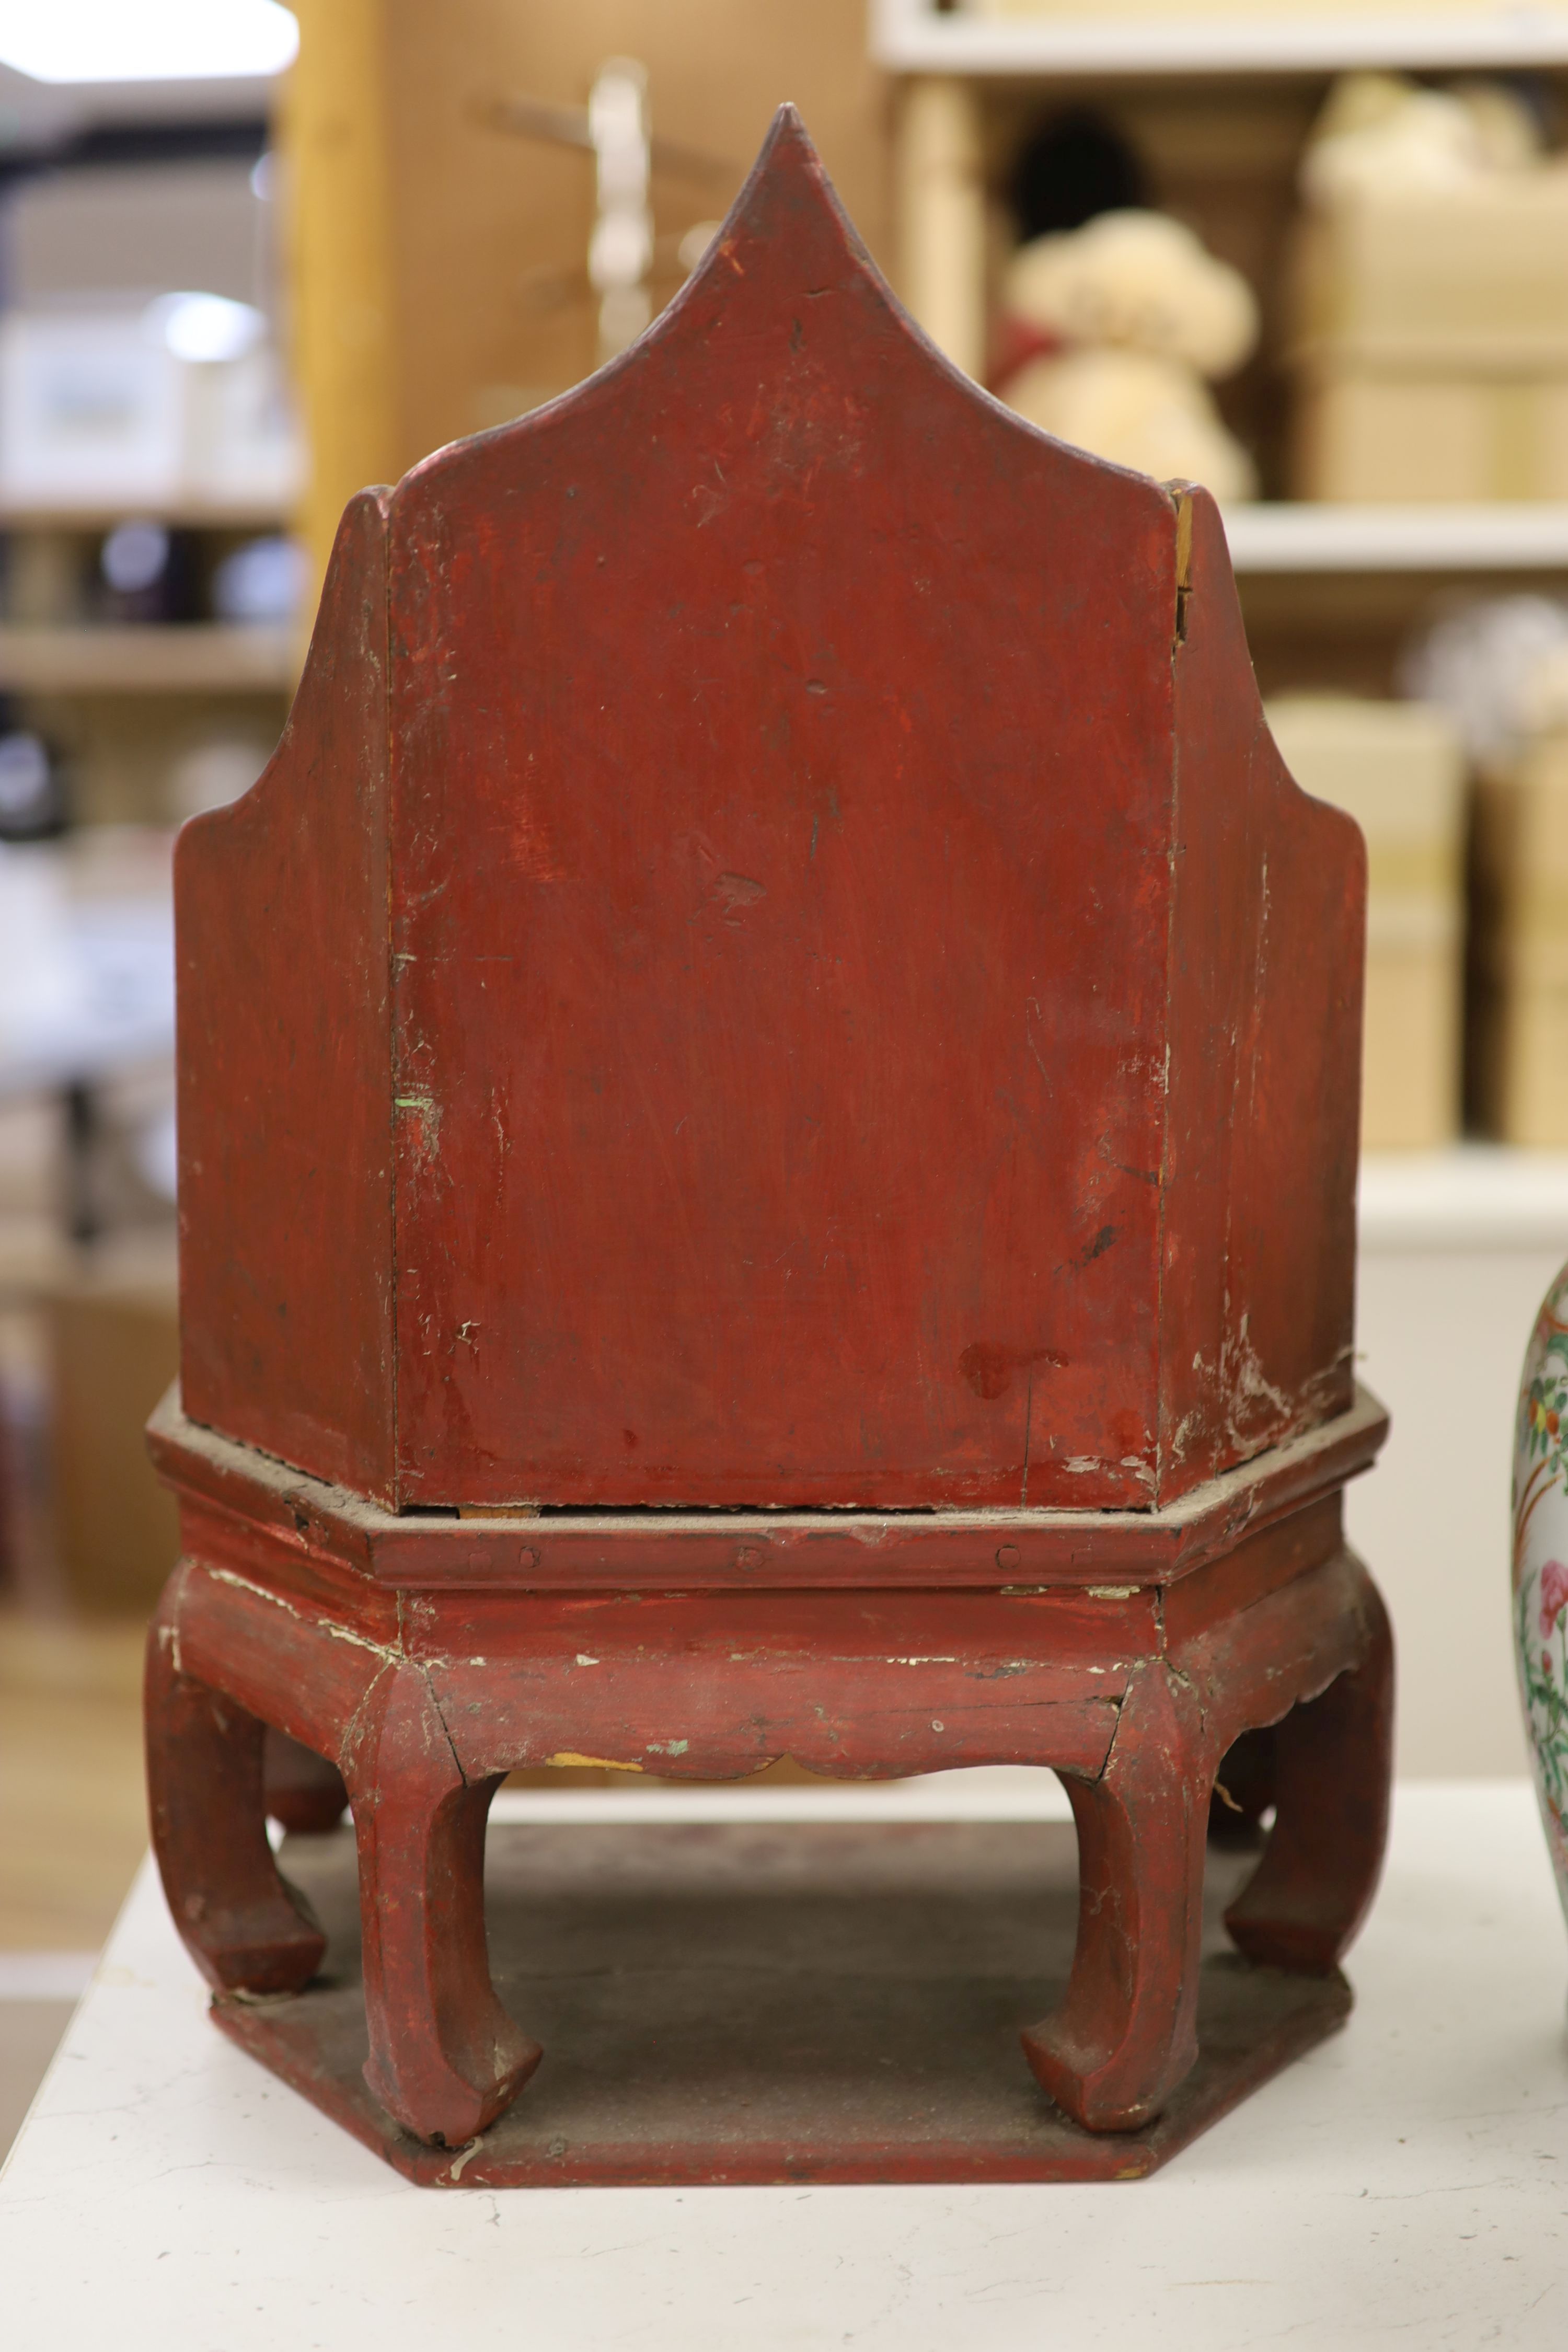 A Japanese lacquered wood model throne for an altar figure, height 46cm